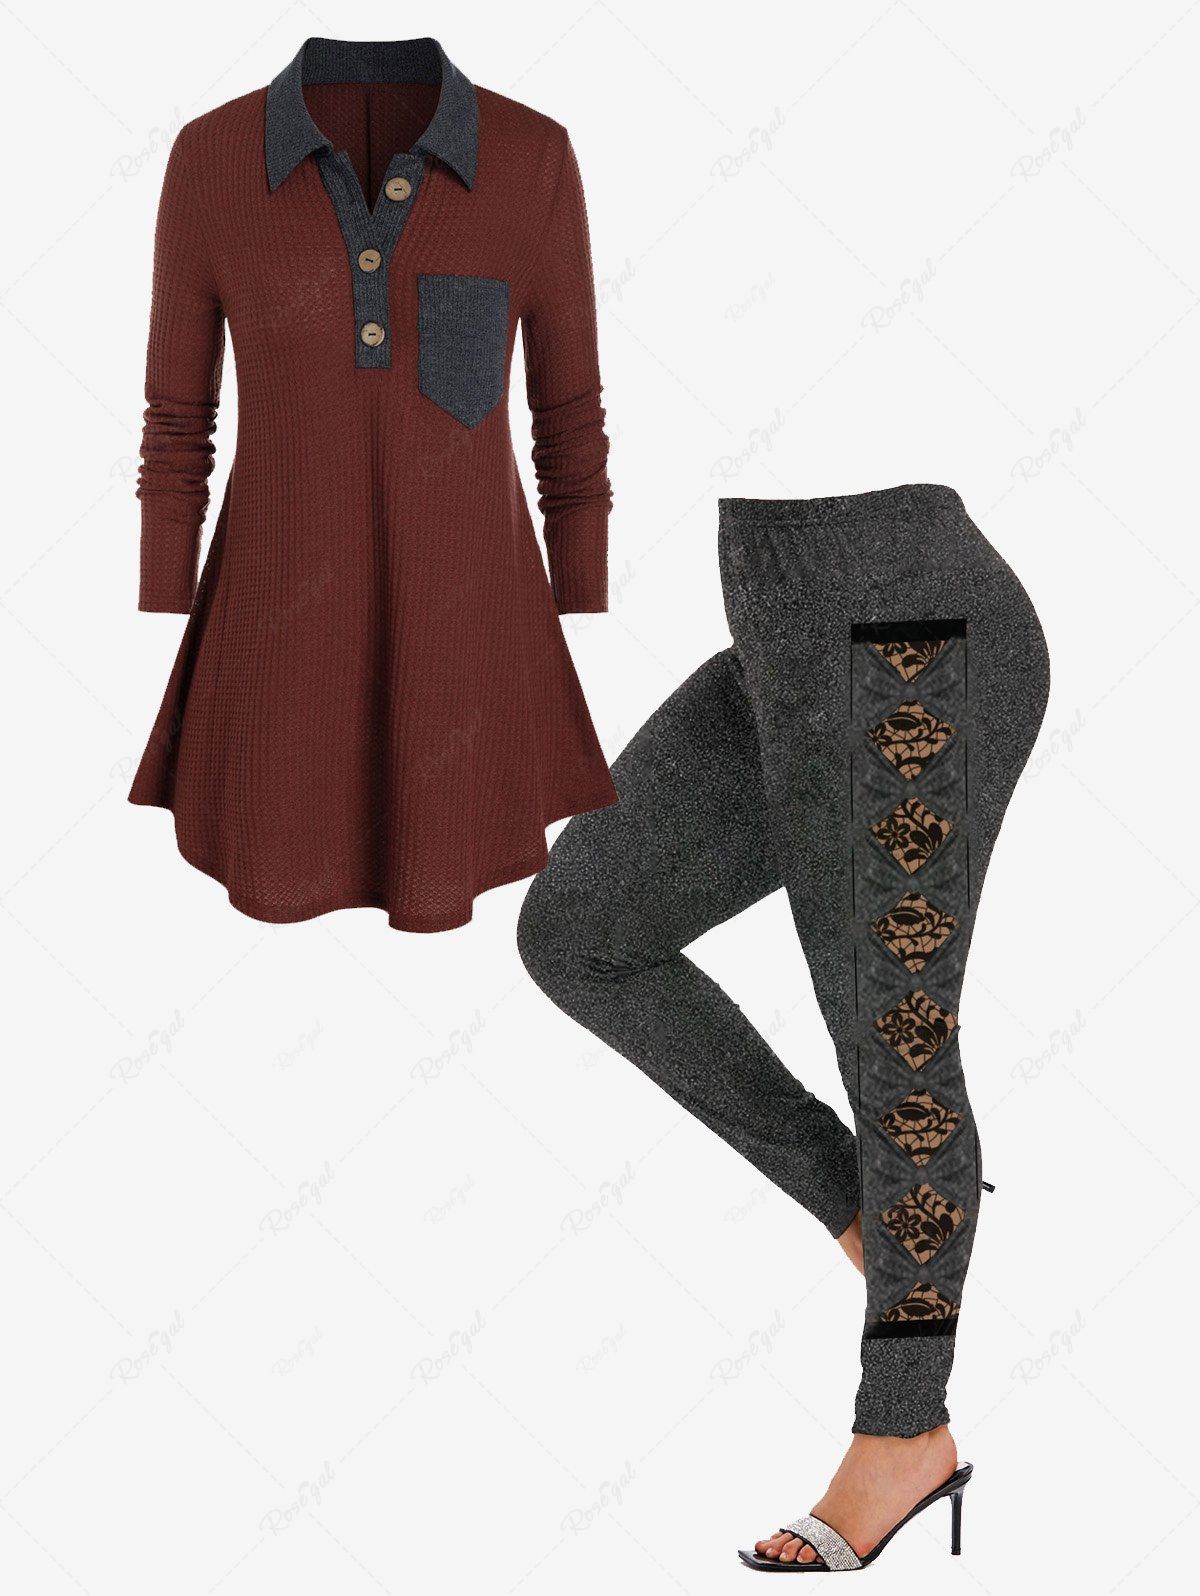 Affordable Contrast Trim Pocket Knitwear and High Waist 3D Bowknot Lace Print Leggings Plus Size Outerwear Outfit  